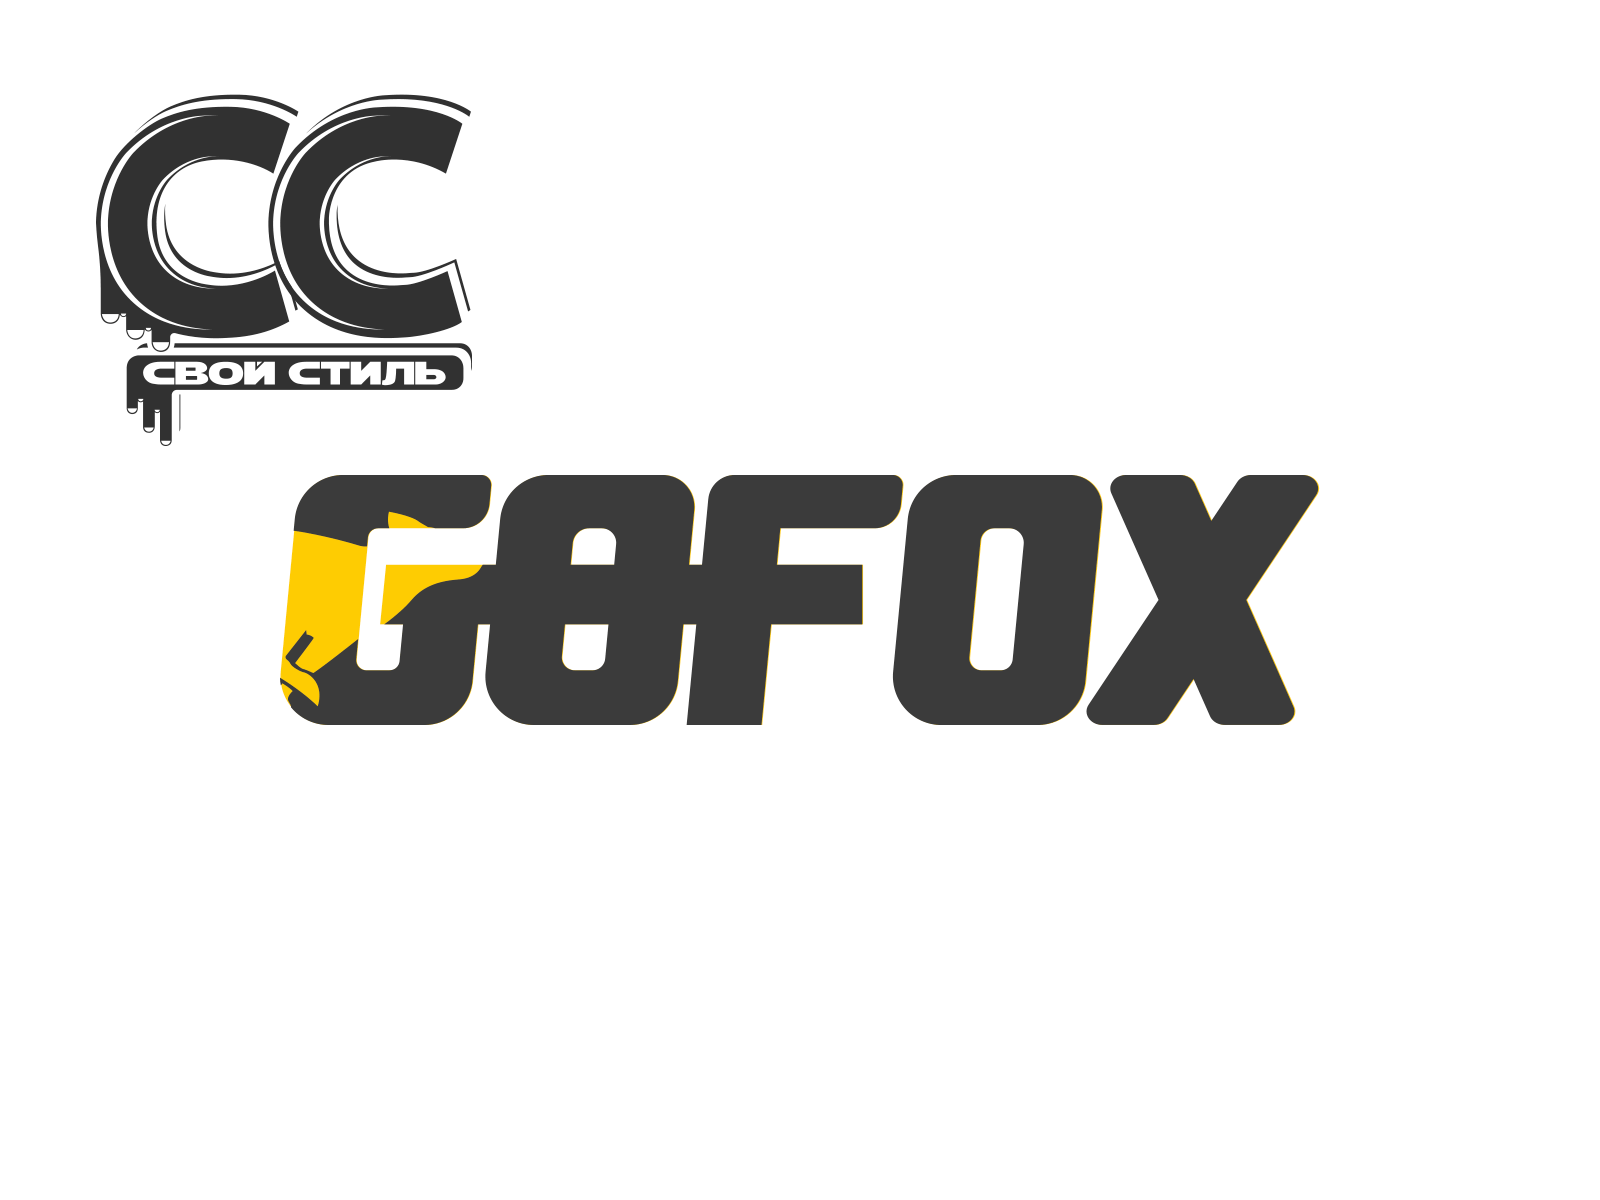 LOGO - GOFOX - Complex projects Saas and dashboards adobe adobe after effects adobe illustrator adobe photoshop animation branding color logo create a logo fast logo graphic designer